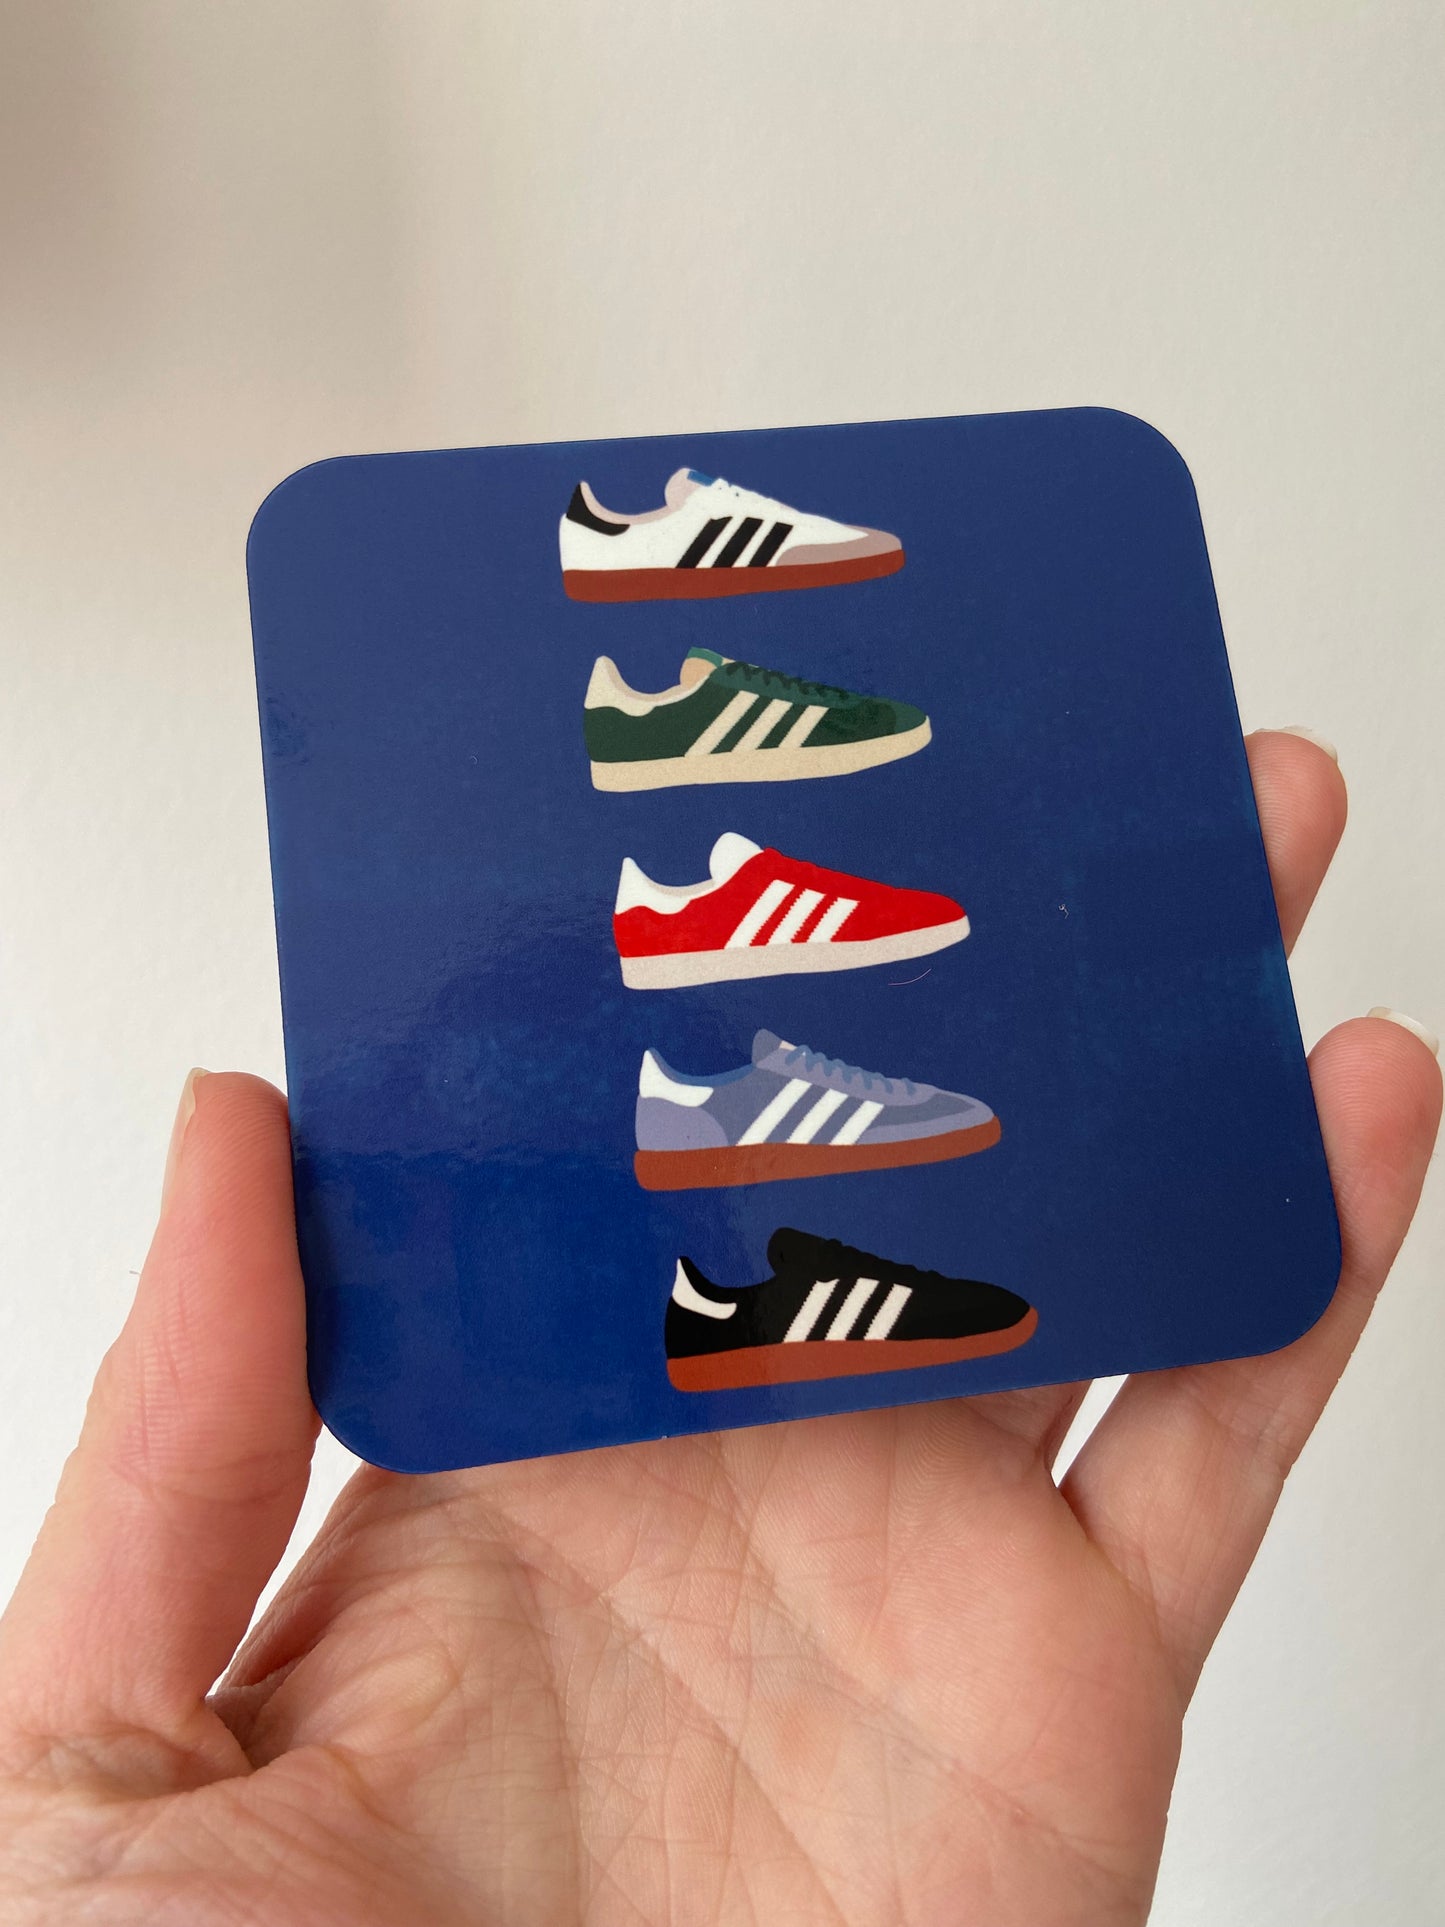 Trainers coaster. Individual or set of 4.